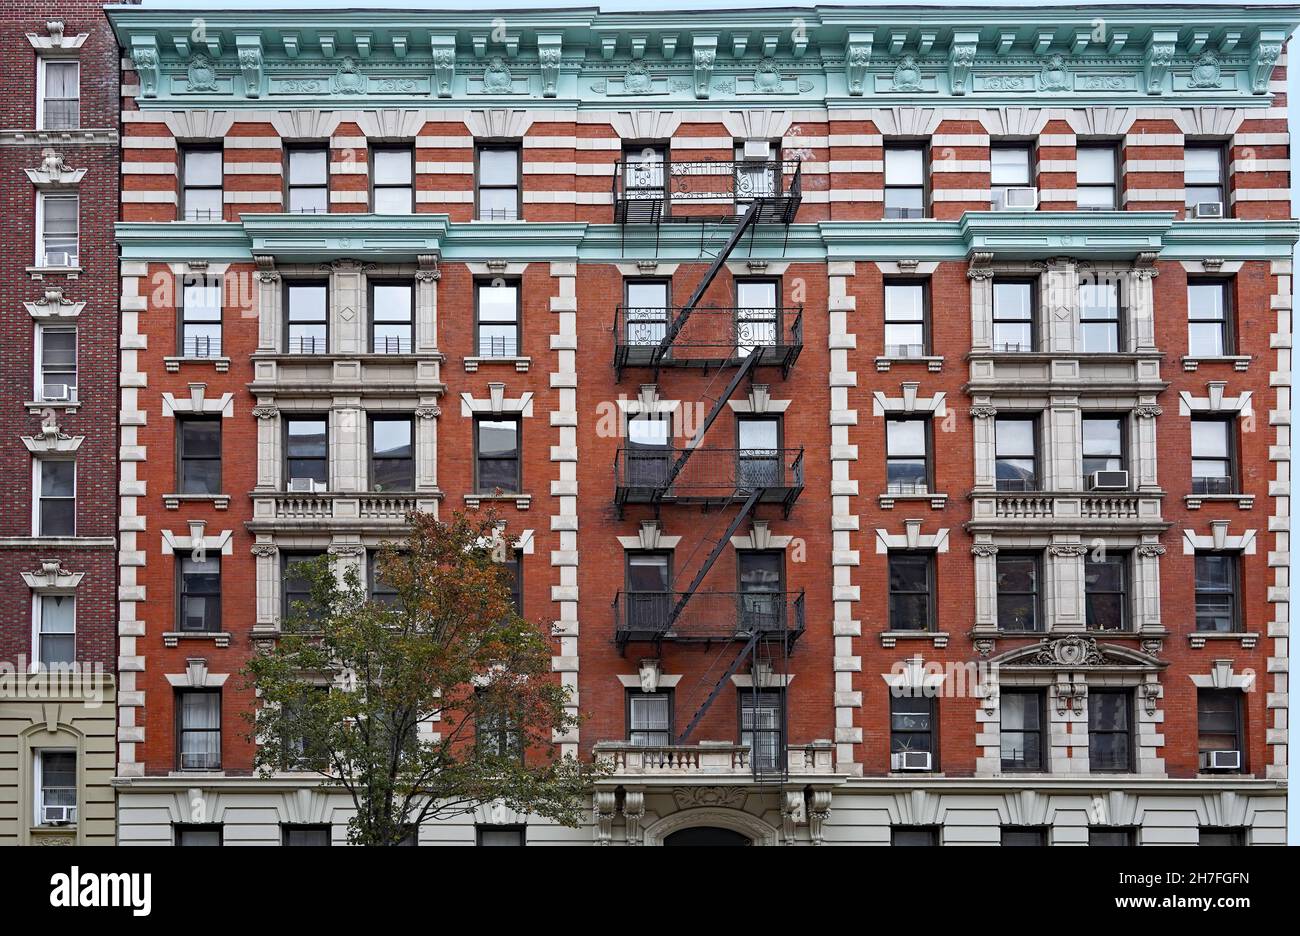 Old fashioned Manhattan apartment building facade with ornate roof cornice and external fire escape ladders Stock Photo